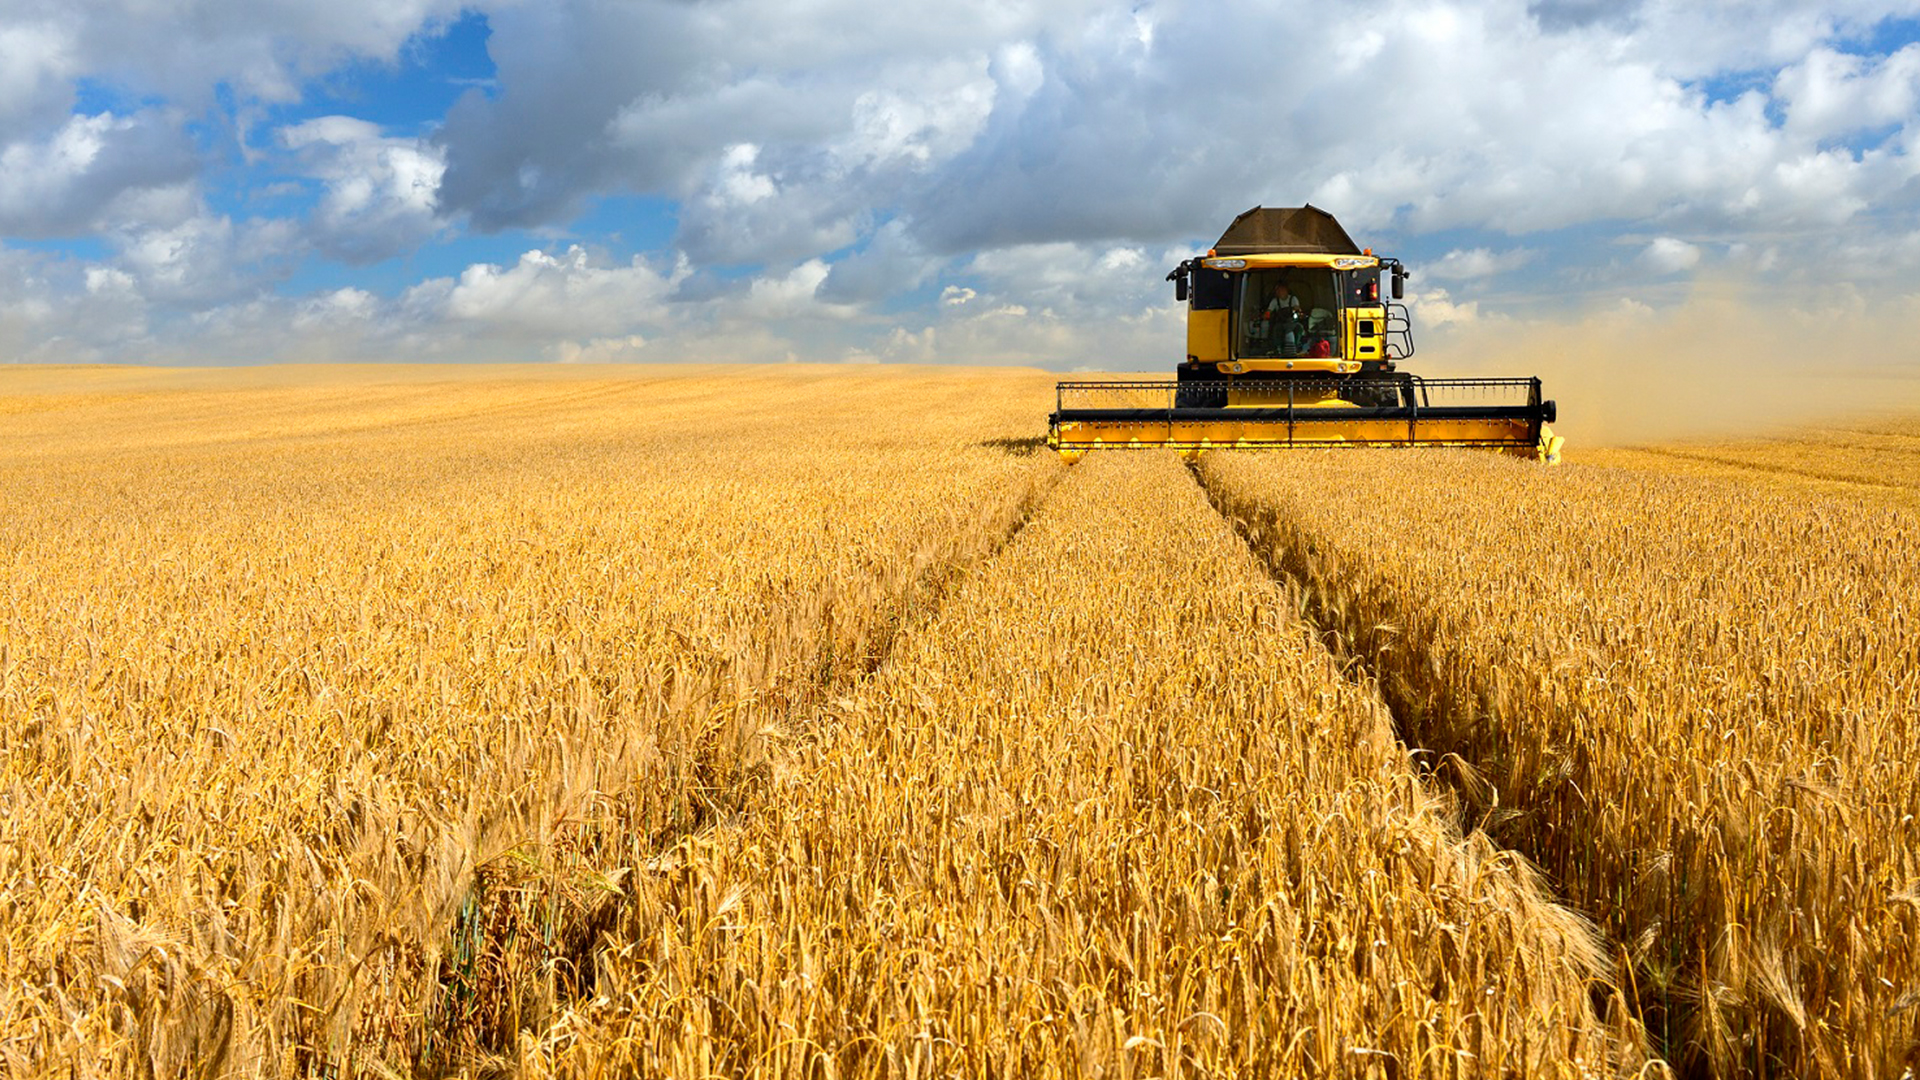 Russian grain exports grew by 40% in May